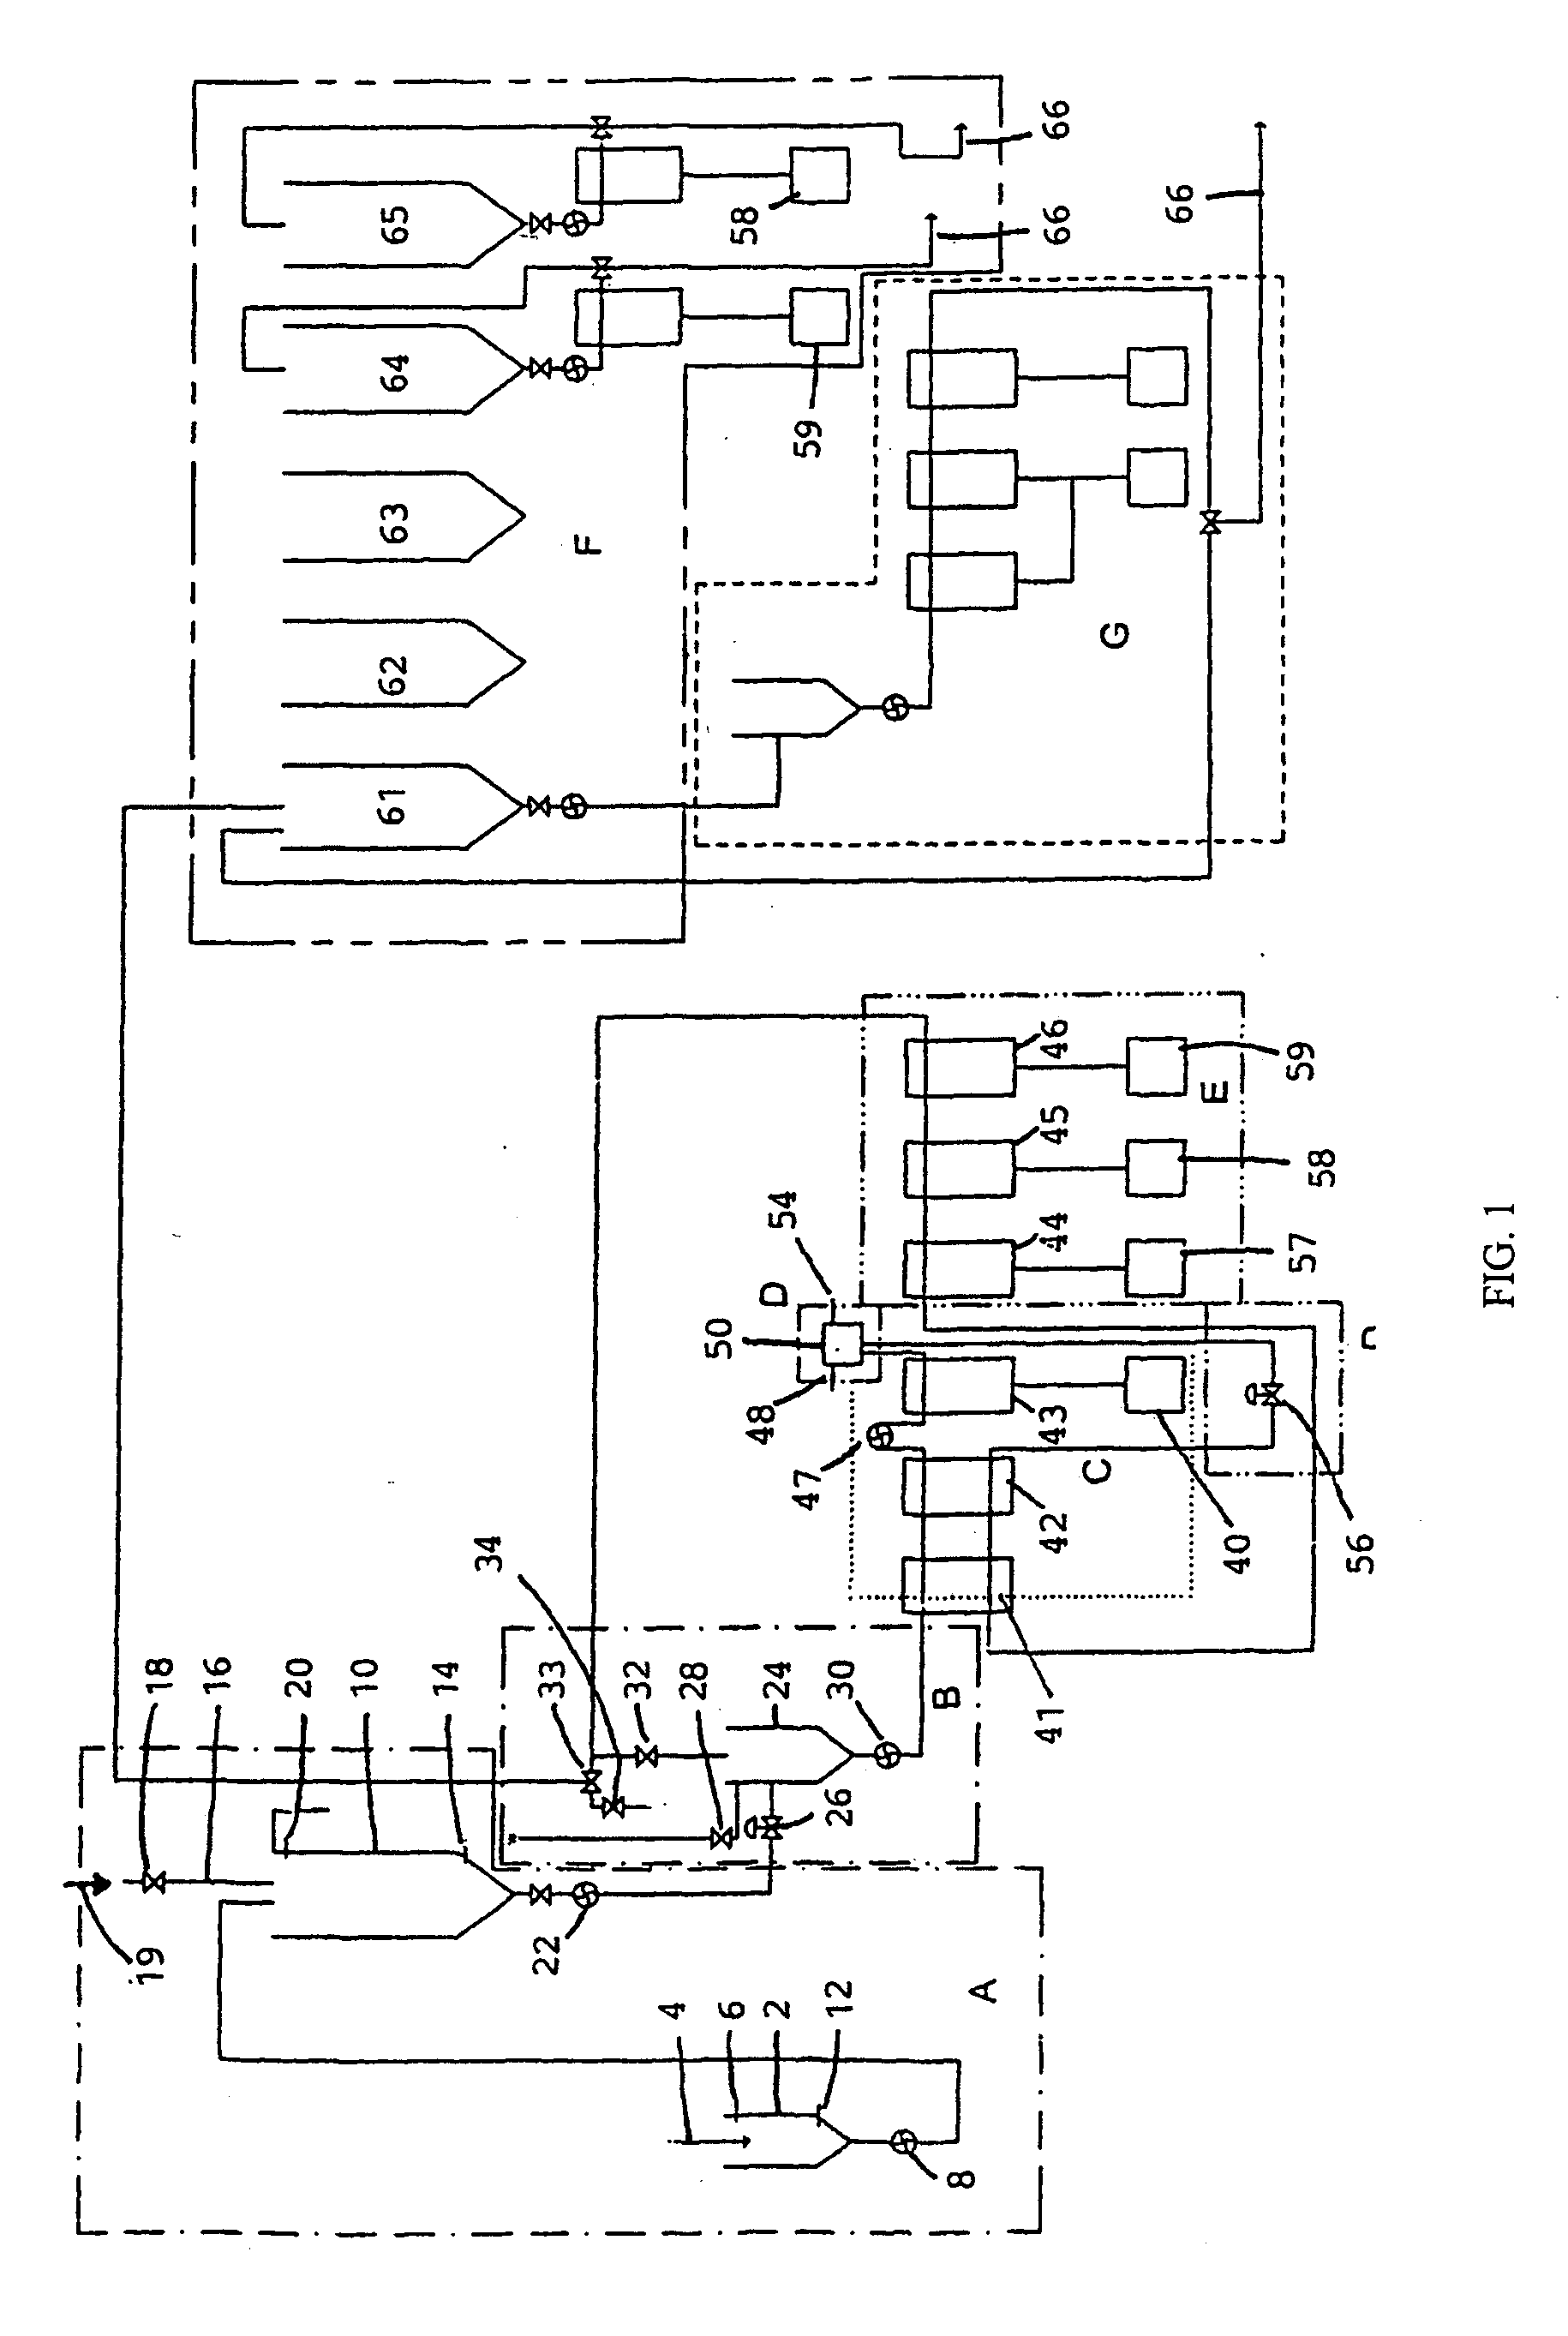 Method and device for treating eggs in shells